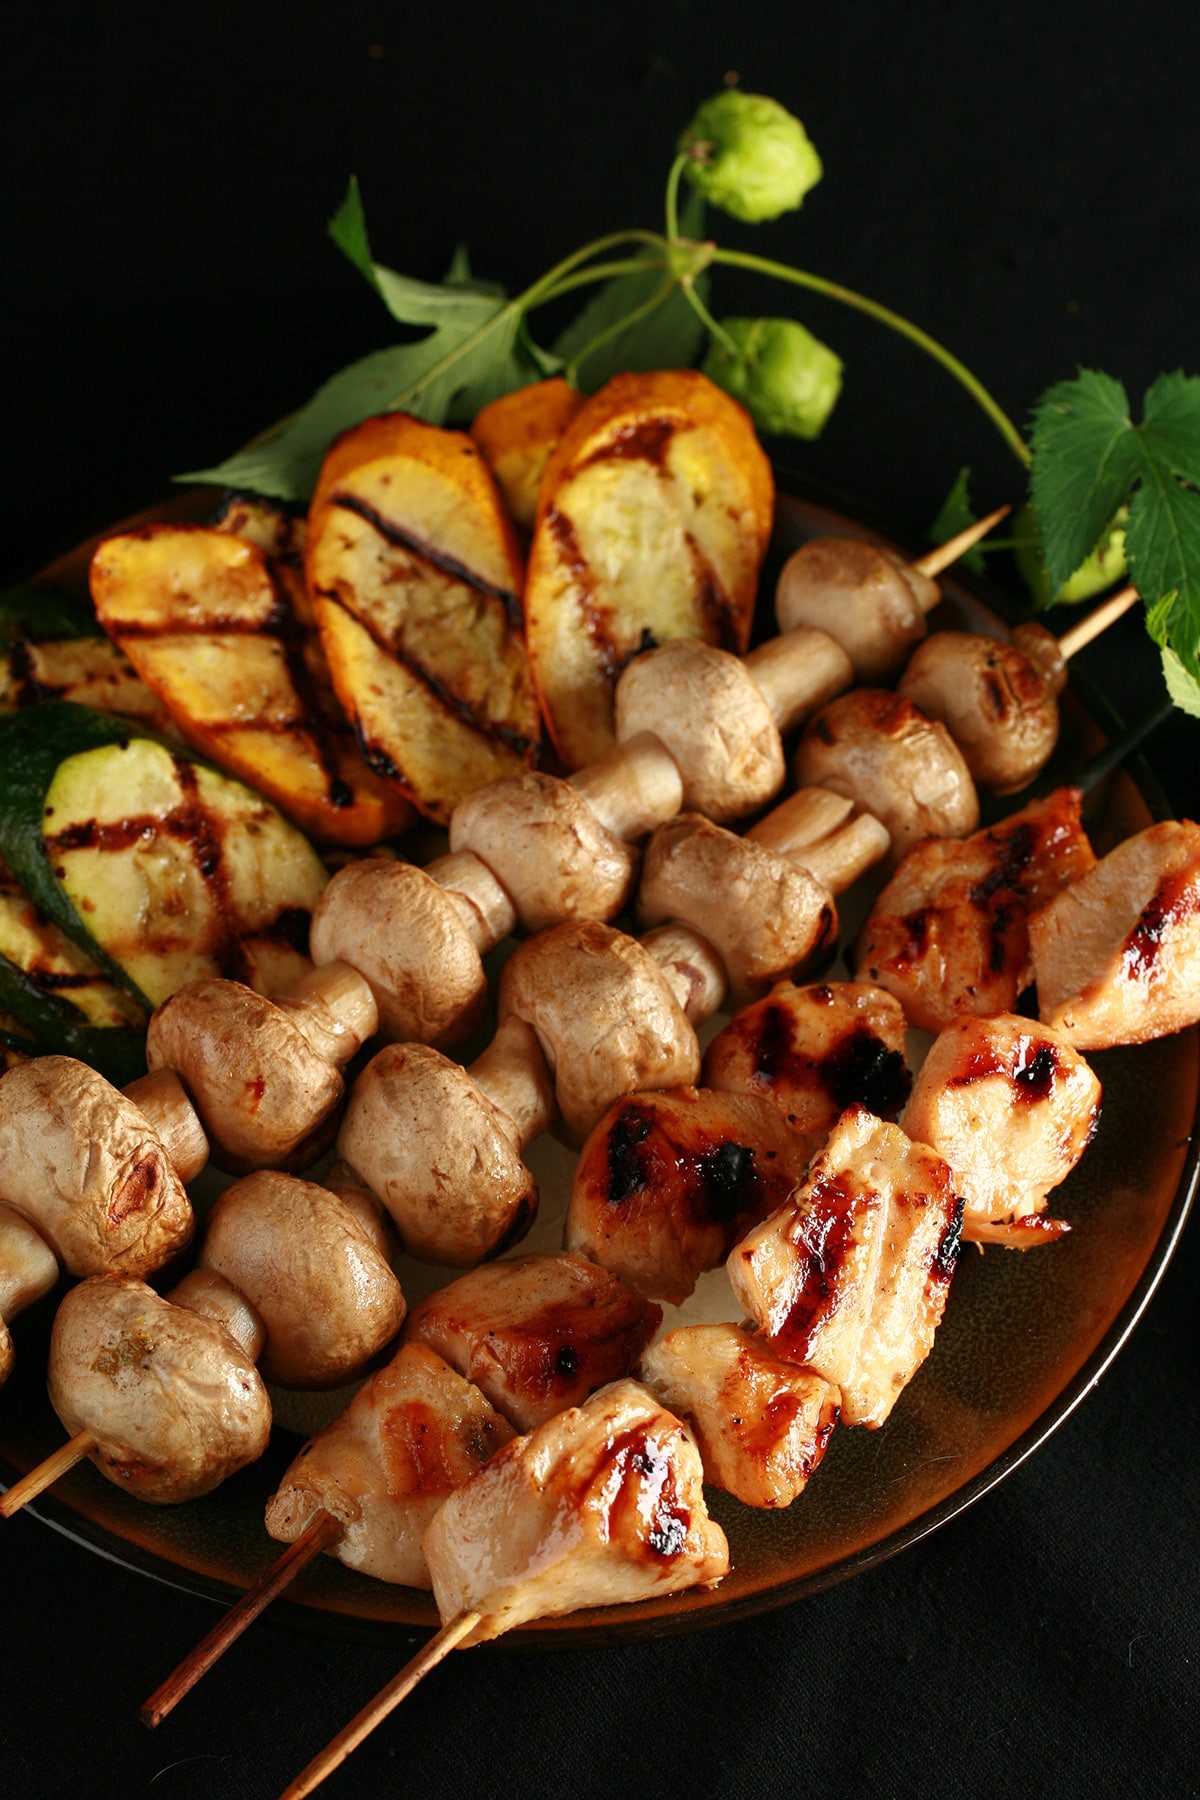 Skewers of hop-marinated grilled chicken, mushrooms, and zucchini are lined up on a brown platter. A hop bine with flowers wraps around the back end of the platter.